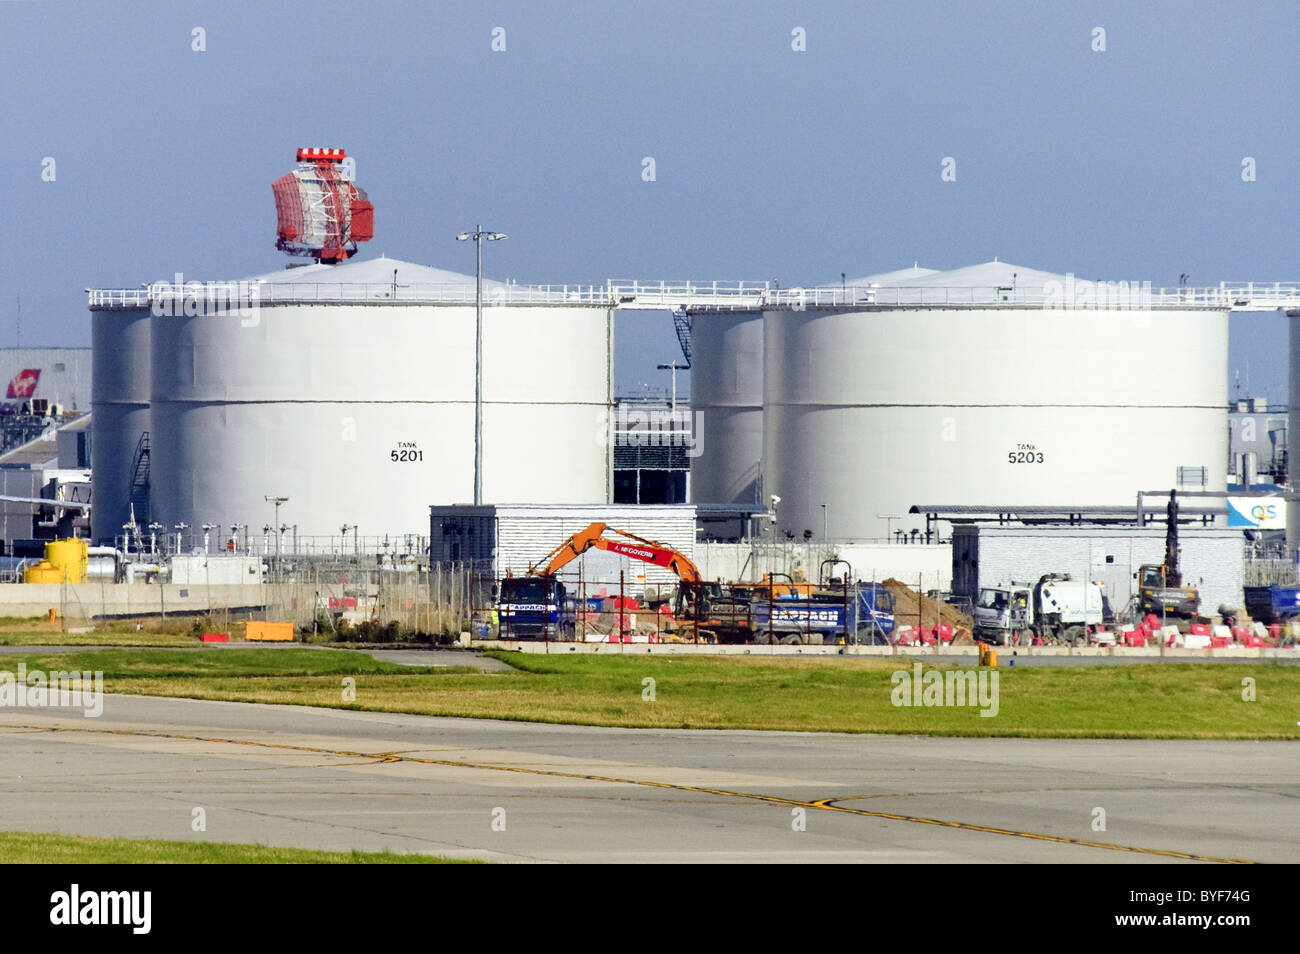 Aviation fuel tanks at London Heathrow Airport. Airport radar visible in background. Stock Photo